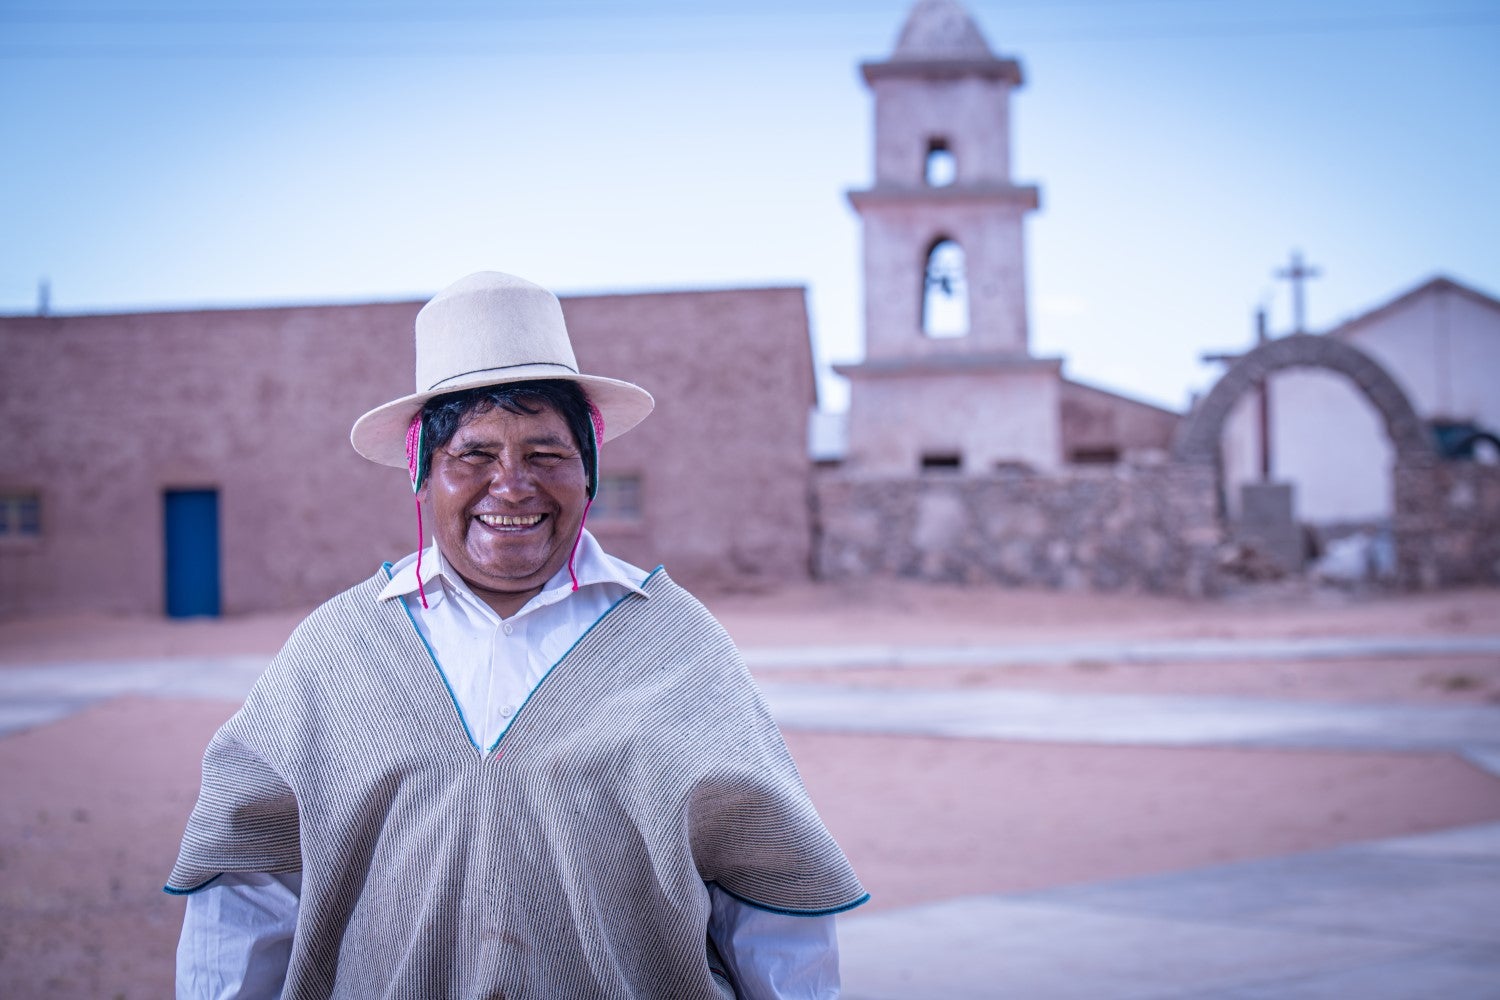 Carlos, a traditional birth attendant in Chipaya, Oruro Department, Bolivia, is one of more than 1,000 people who have participated in PAHO training sessions supported by Canadian cooperation.